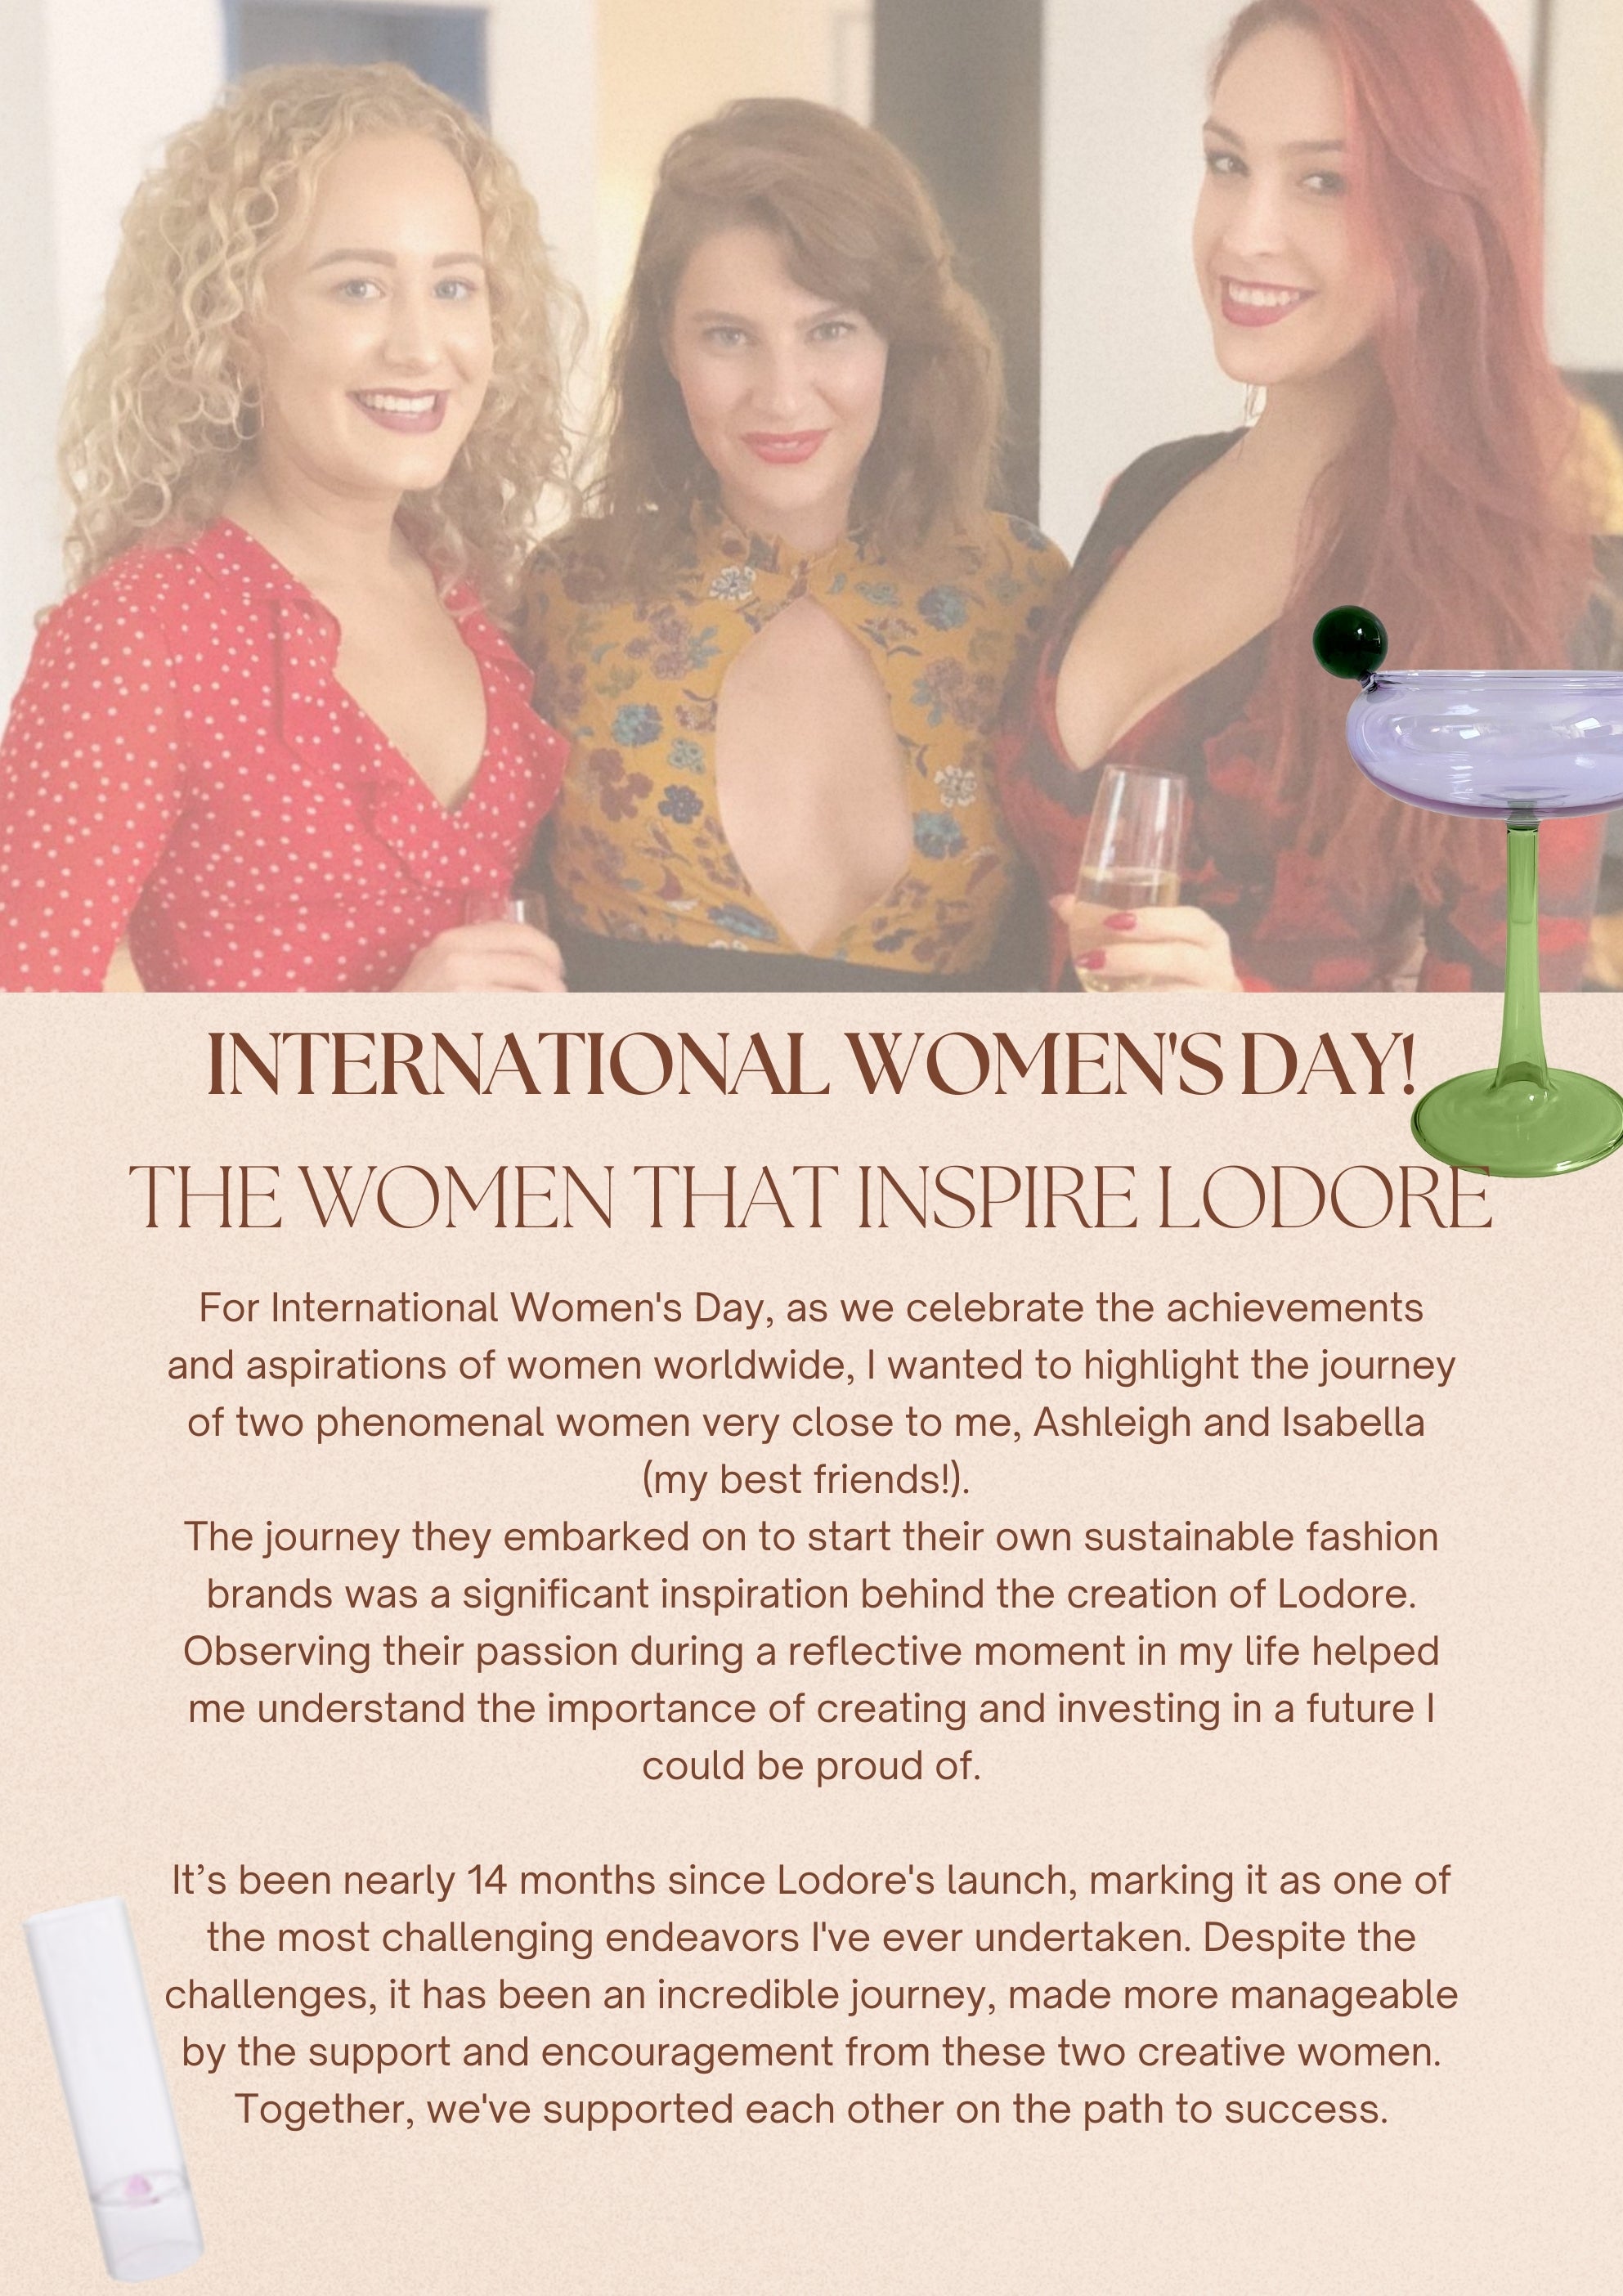 Celebrate Women's Empowerment with the Women who inspire Lodore